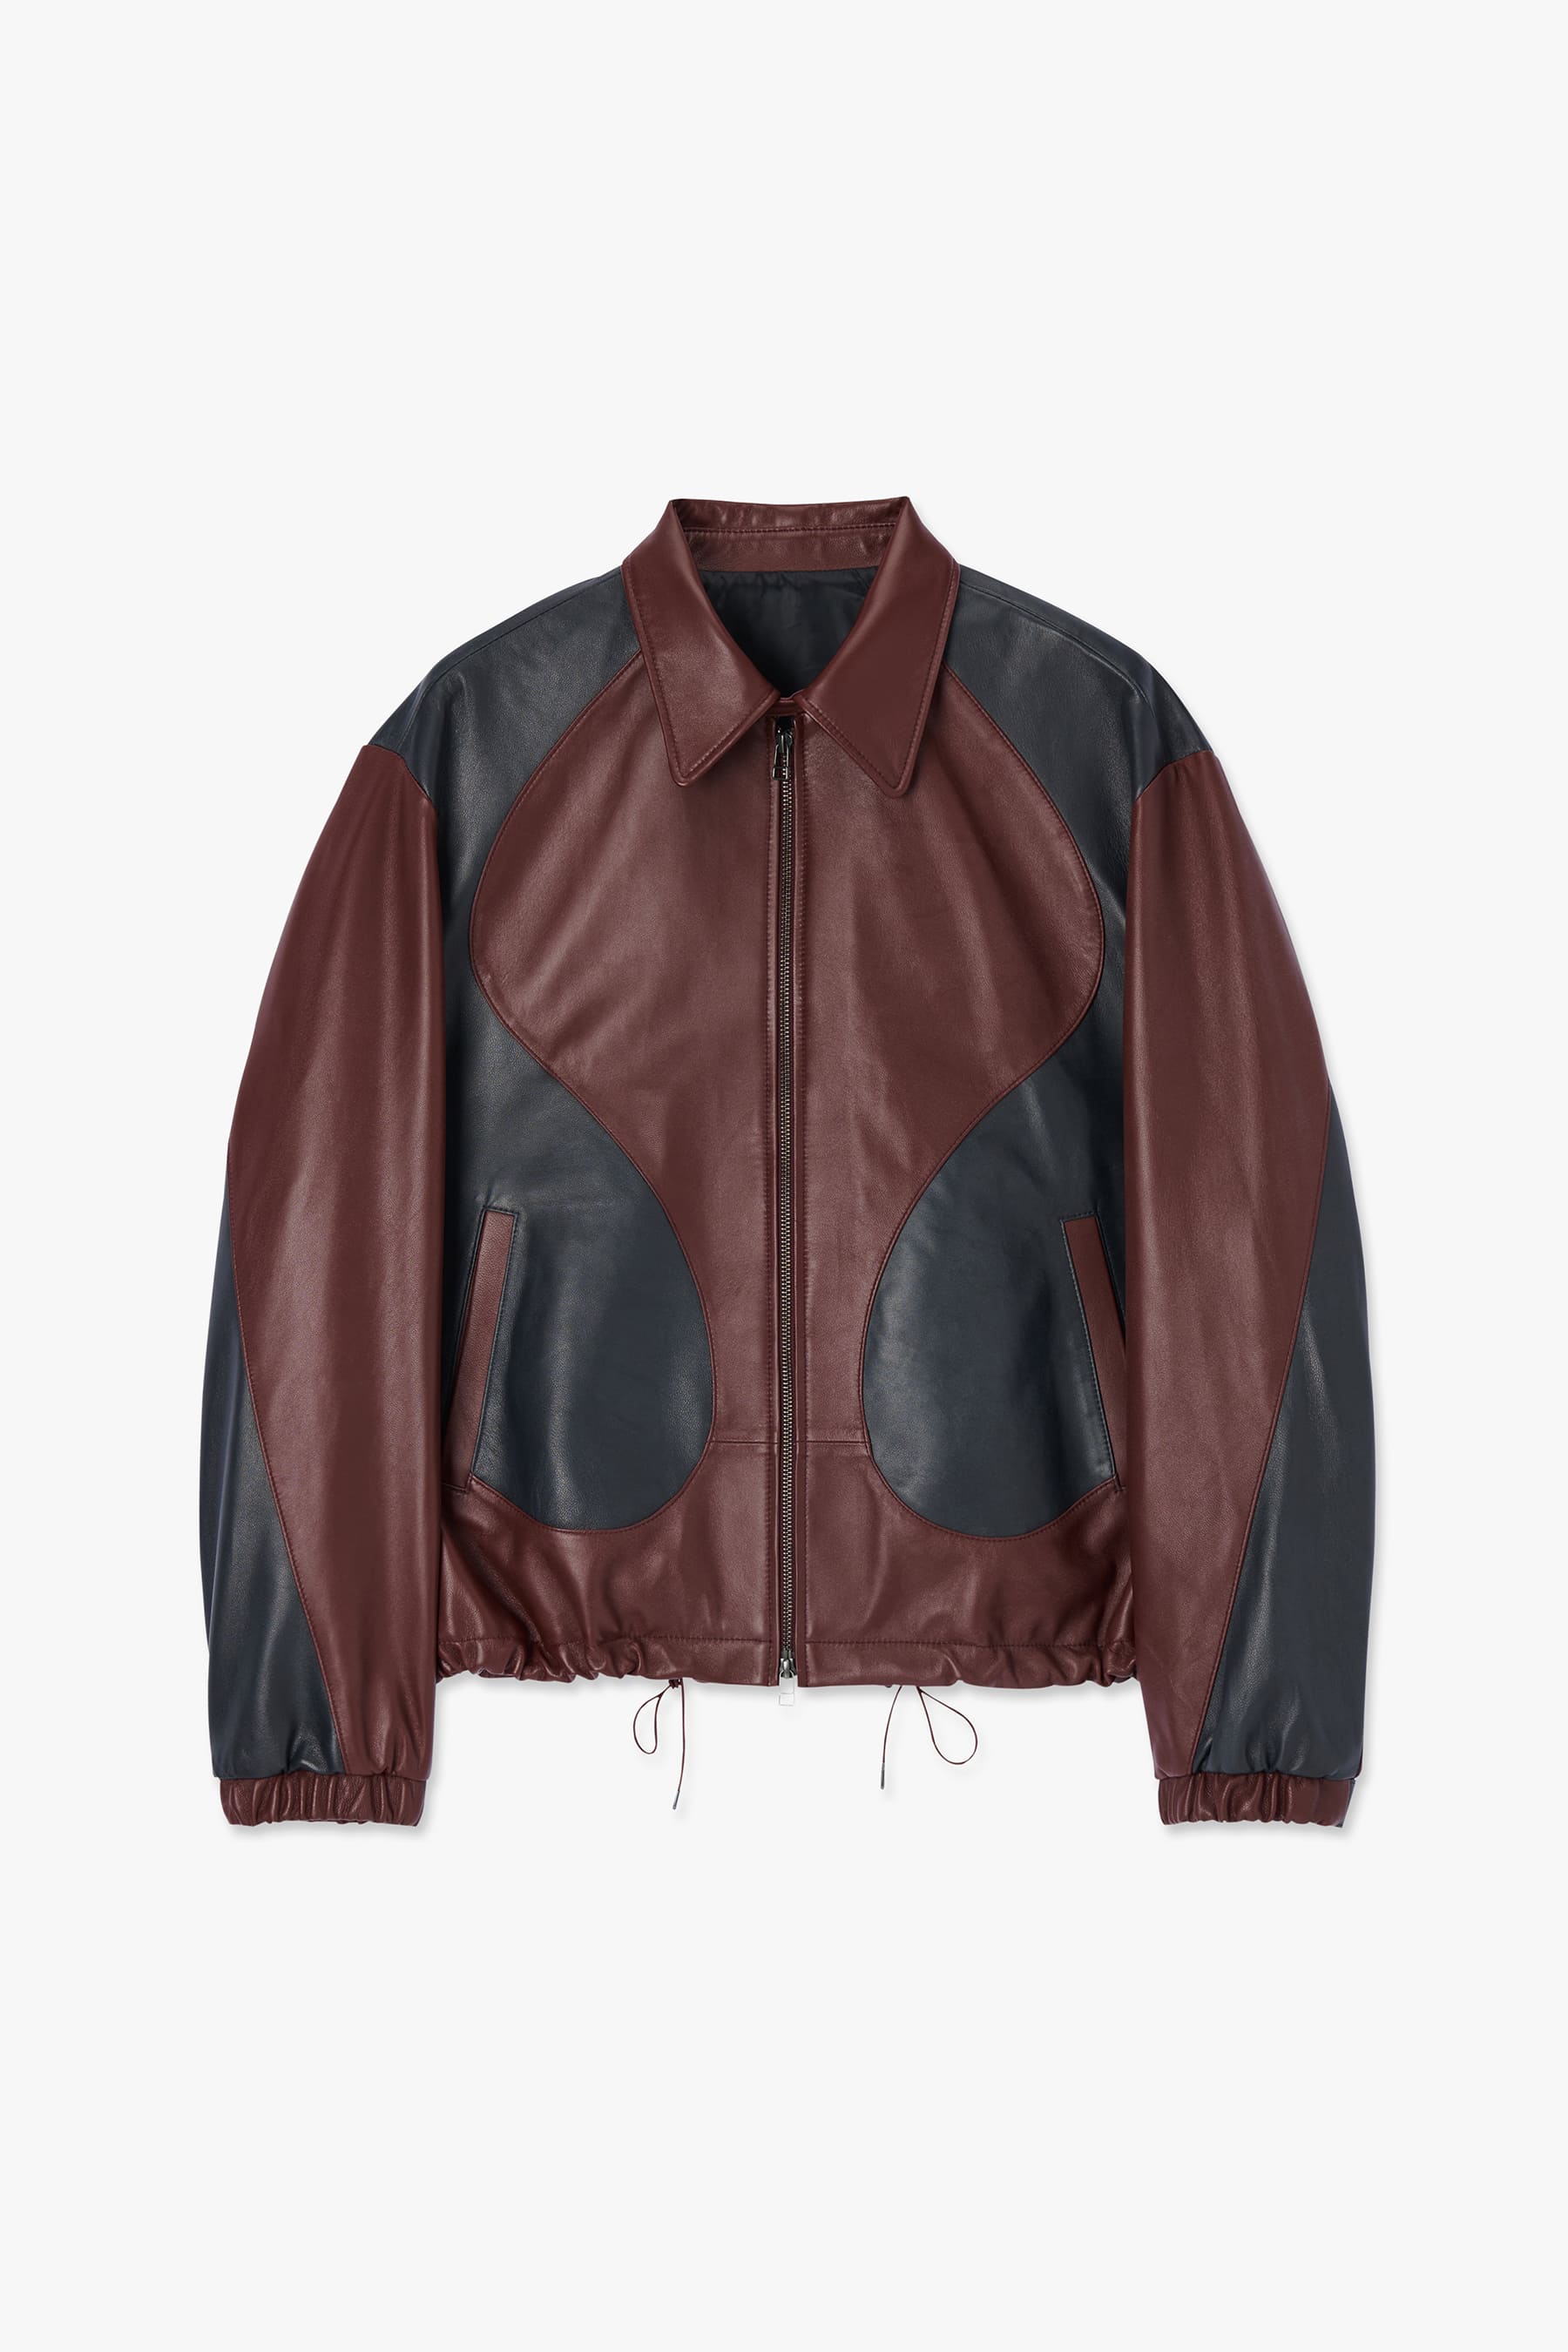 WINE/NAVY LAMB SKIN LEATHER SECTIONED BLOUSON